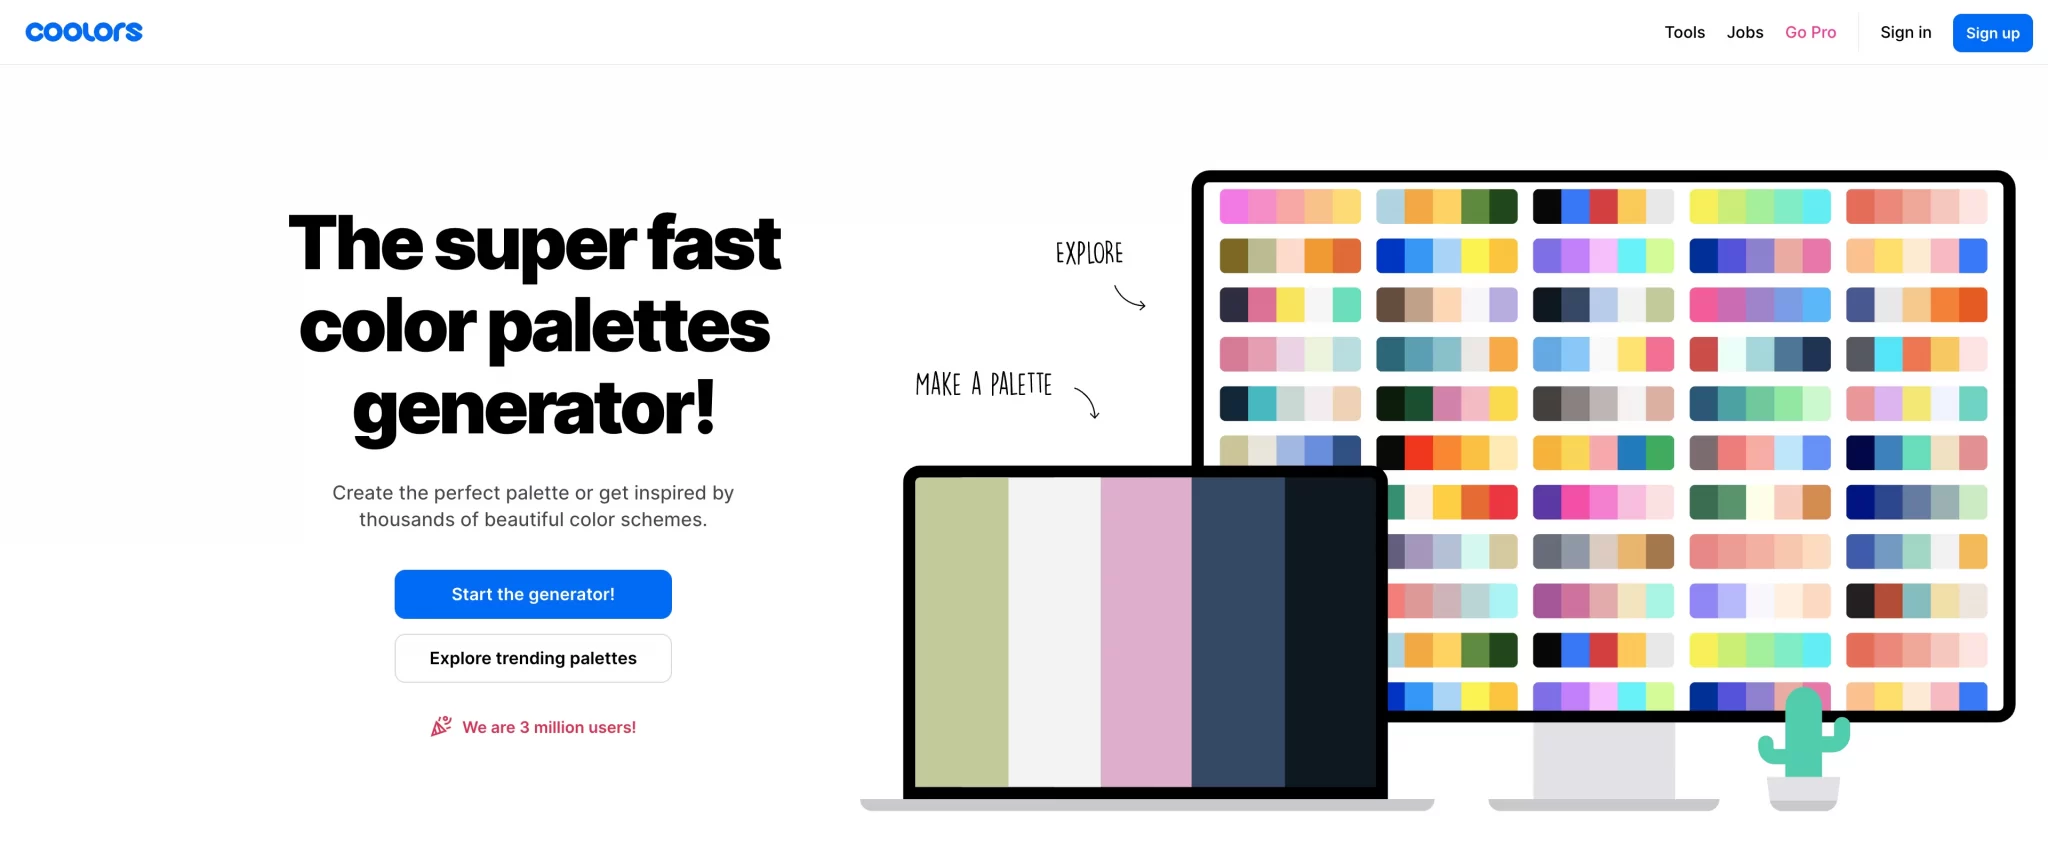 Coolors is a graphic palette creation tool.